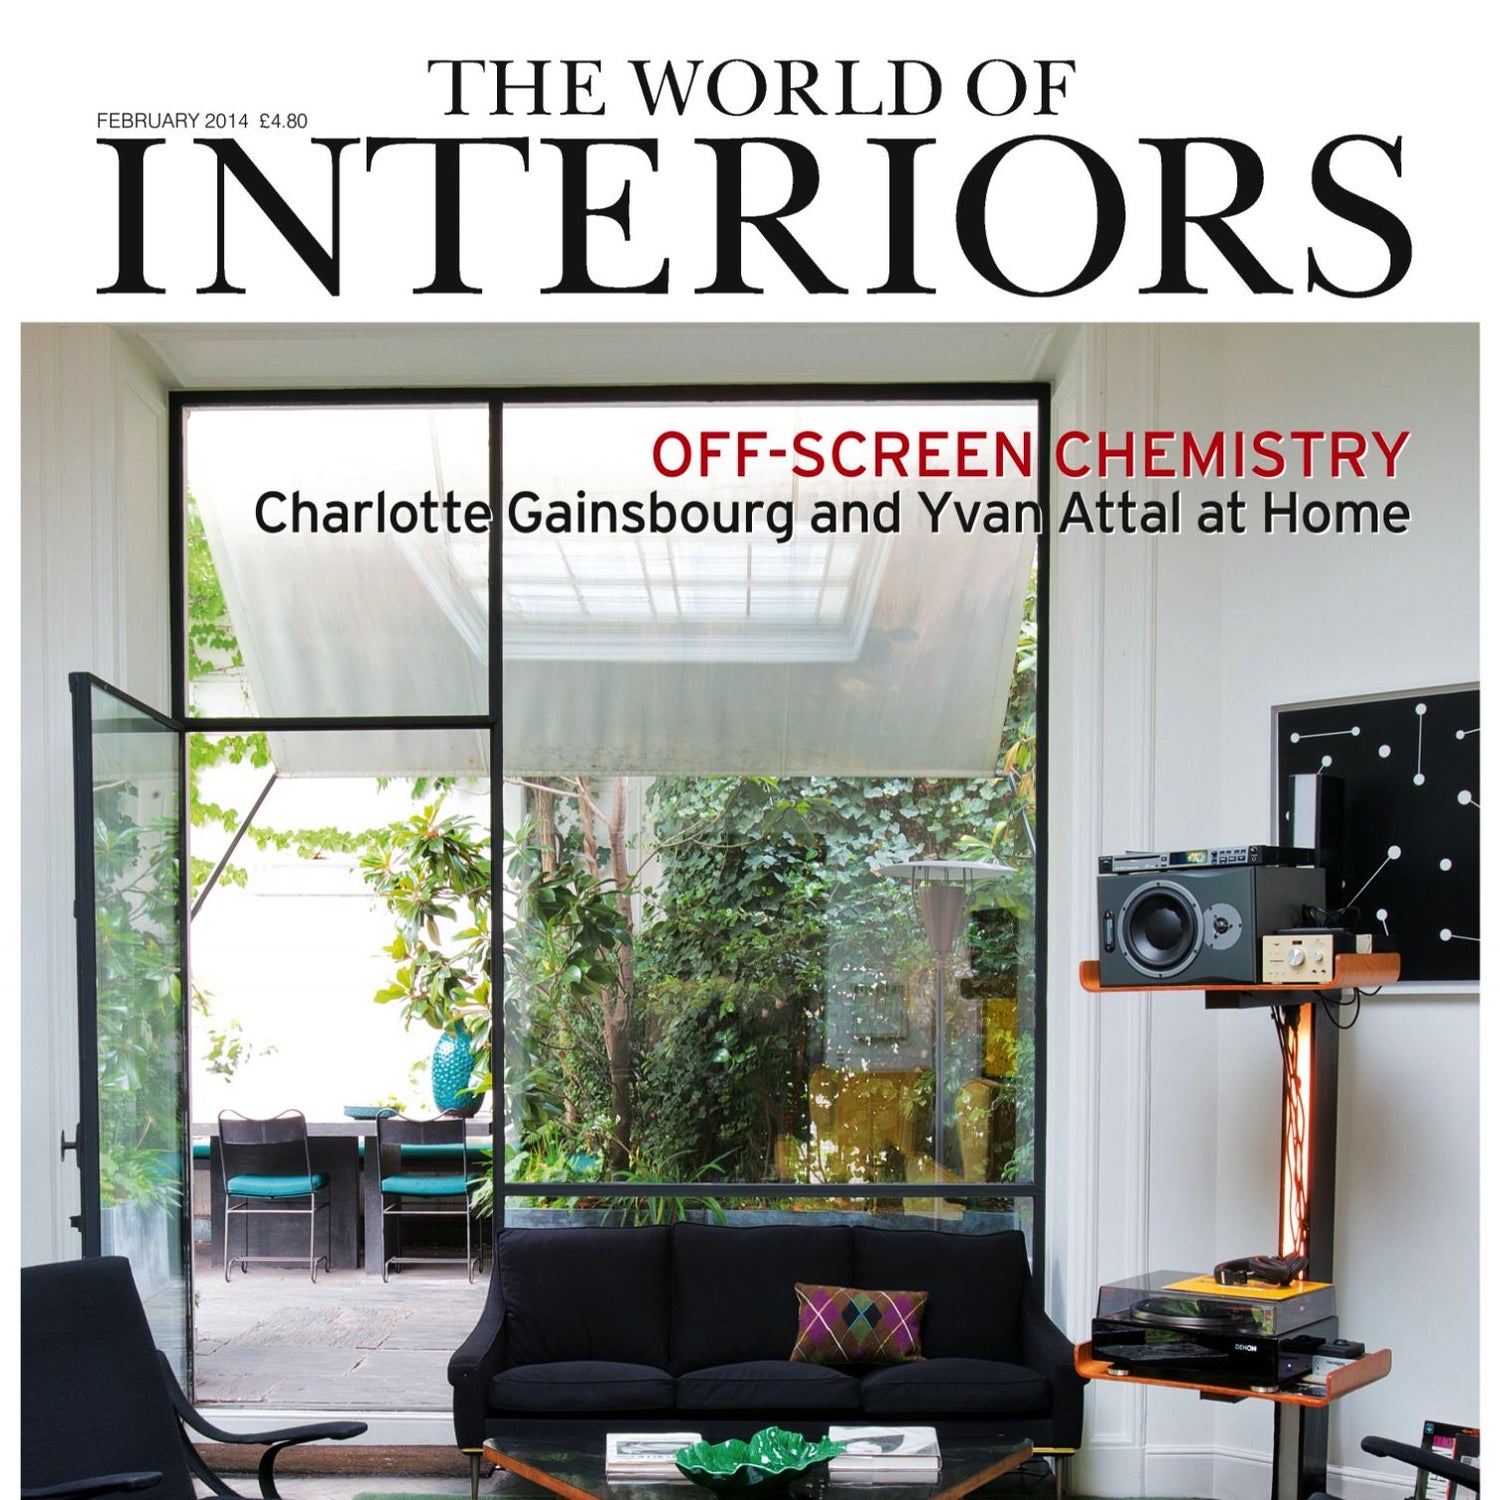 World of Interiors feature on Smartphone cables